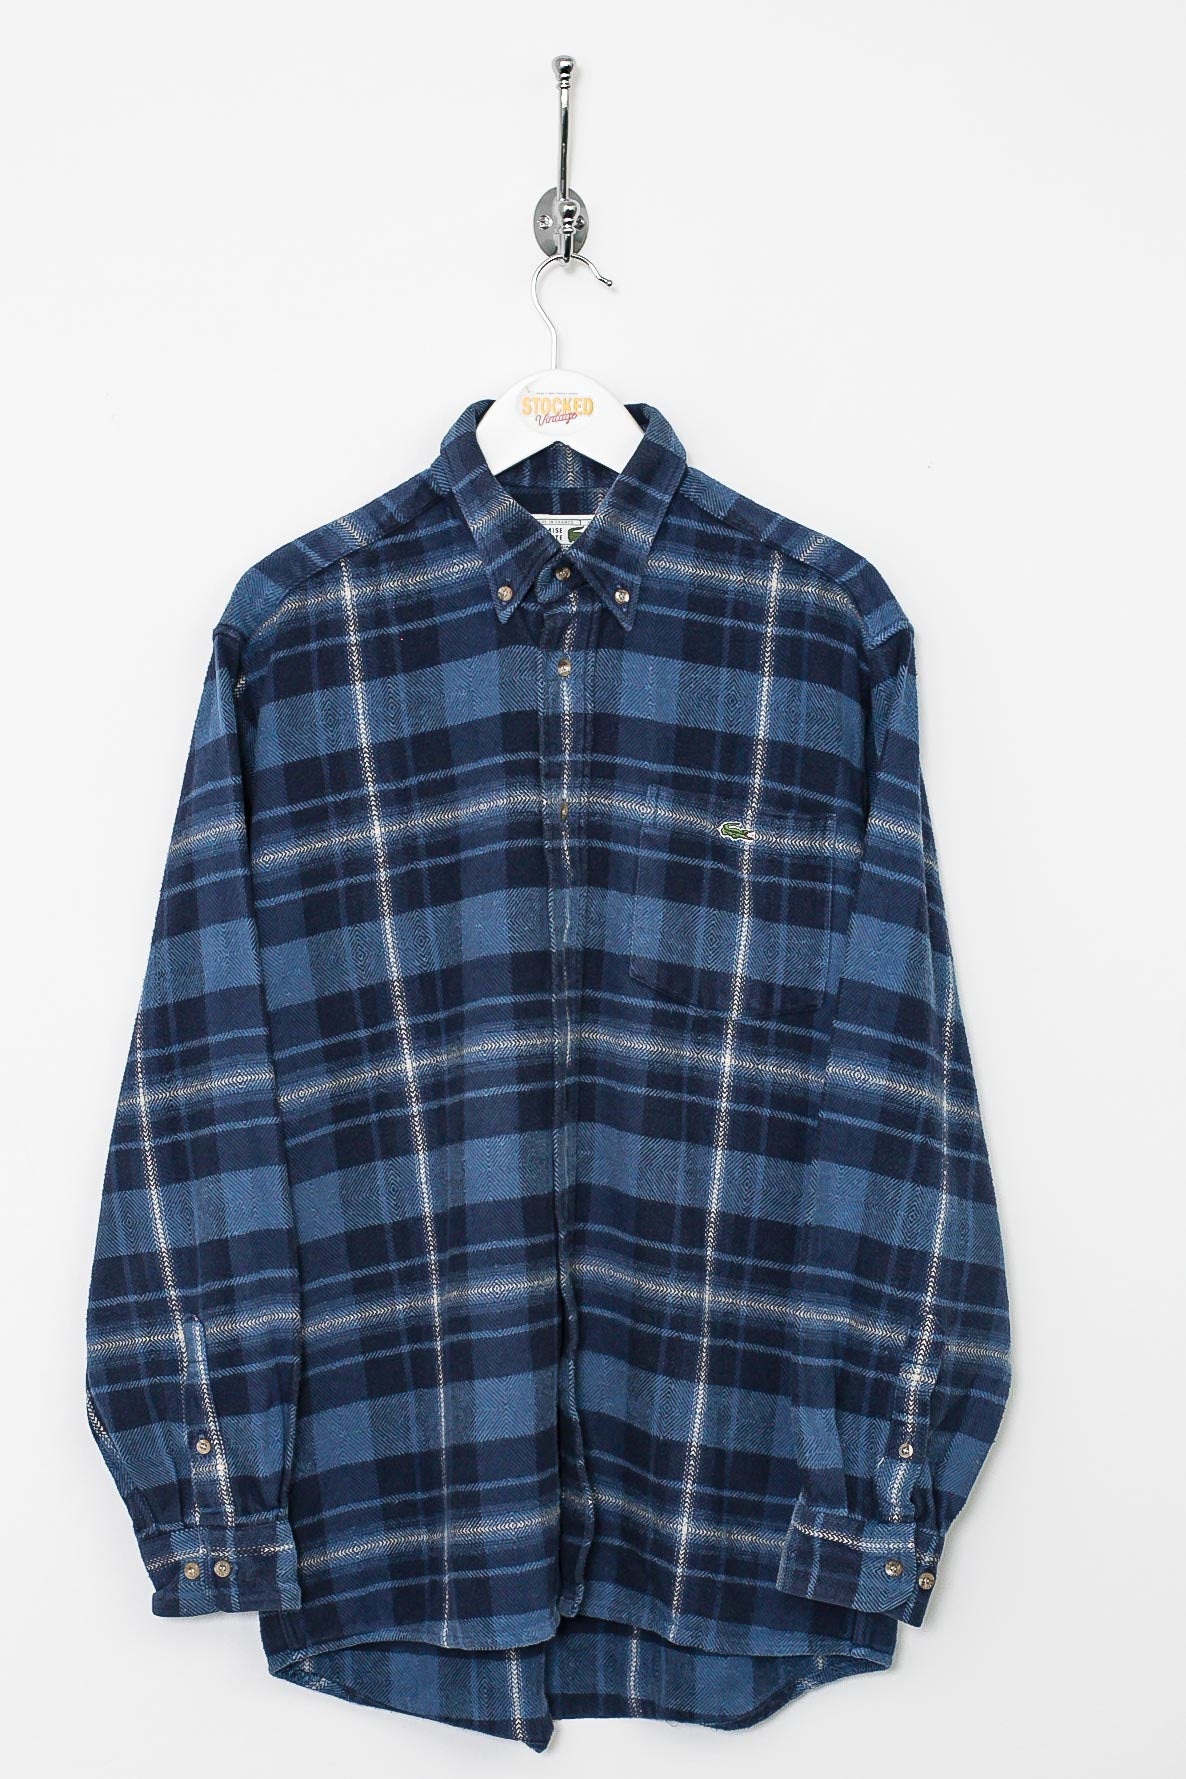 90s Lacoste Flannel Over Shirt (S)